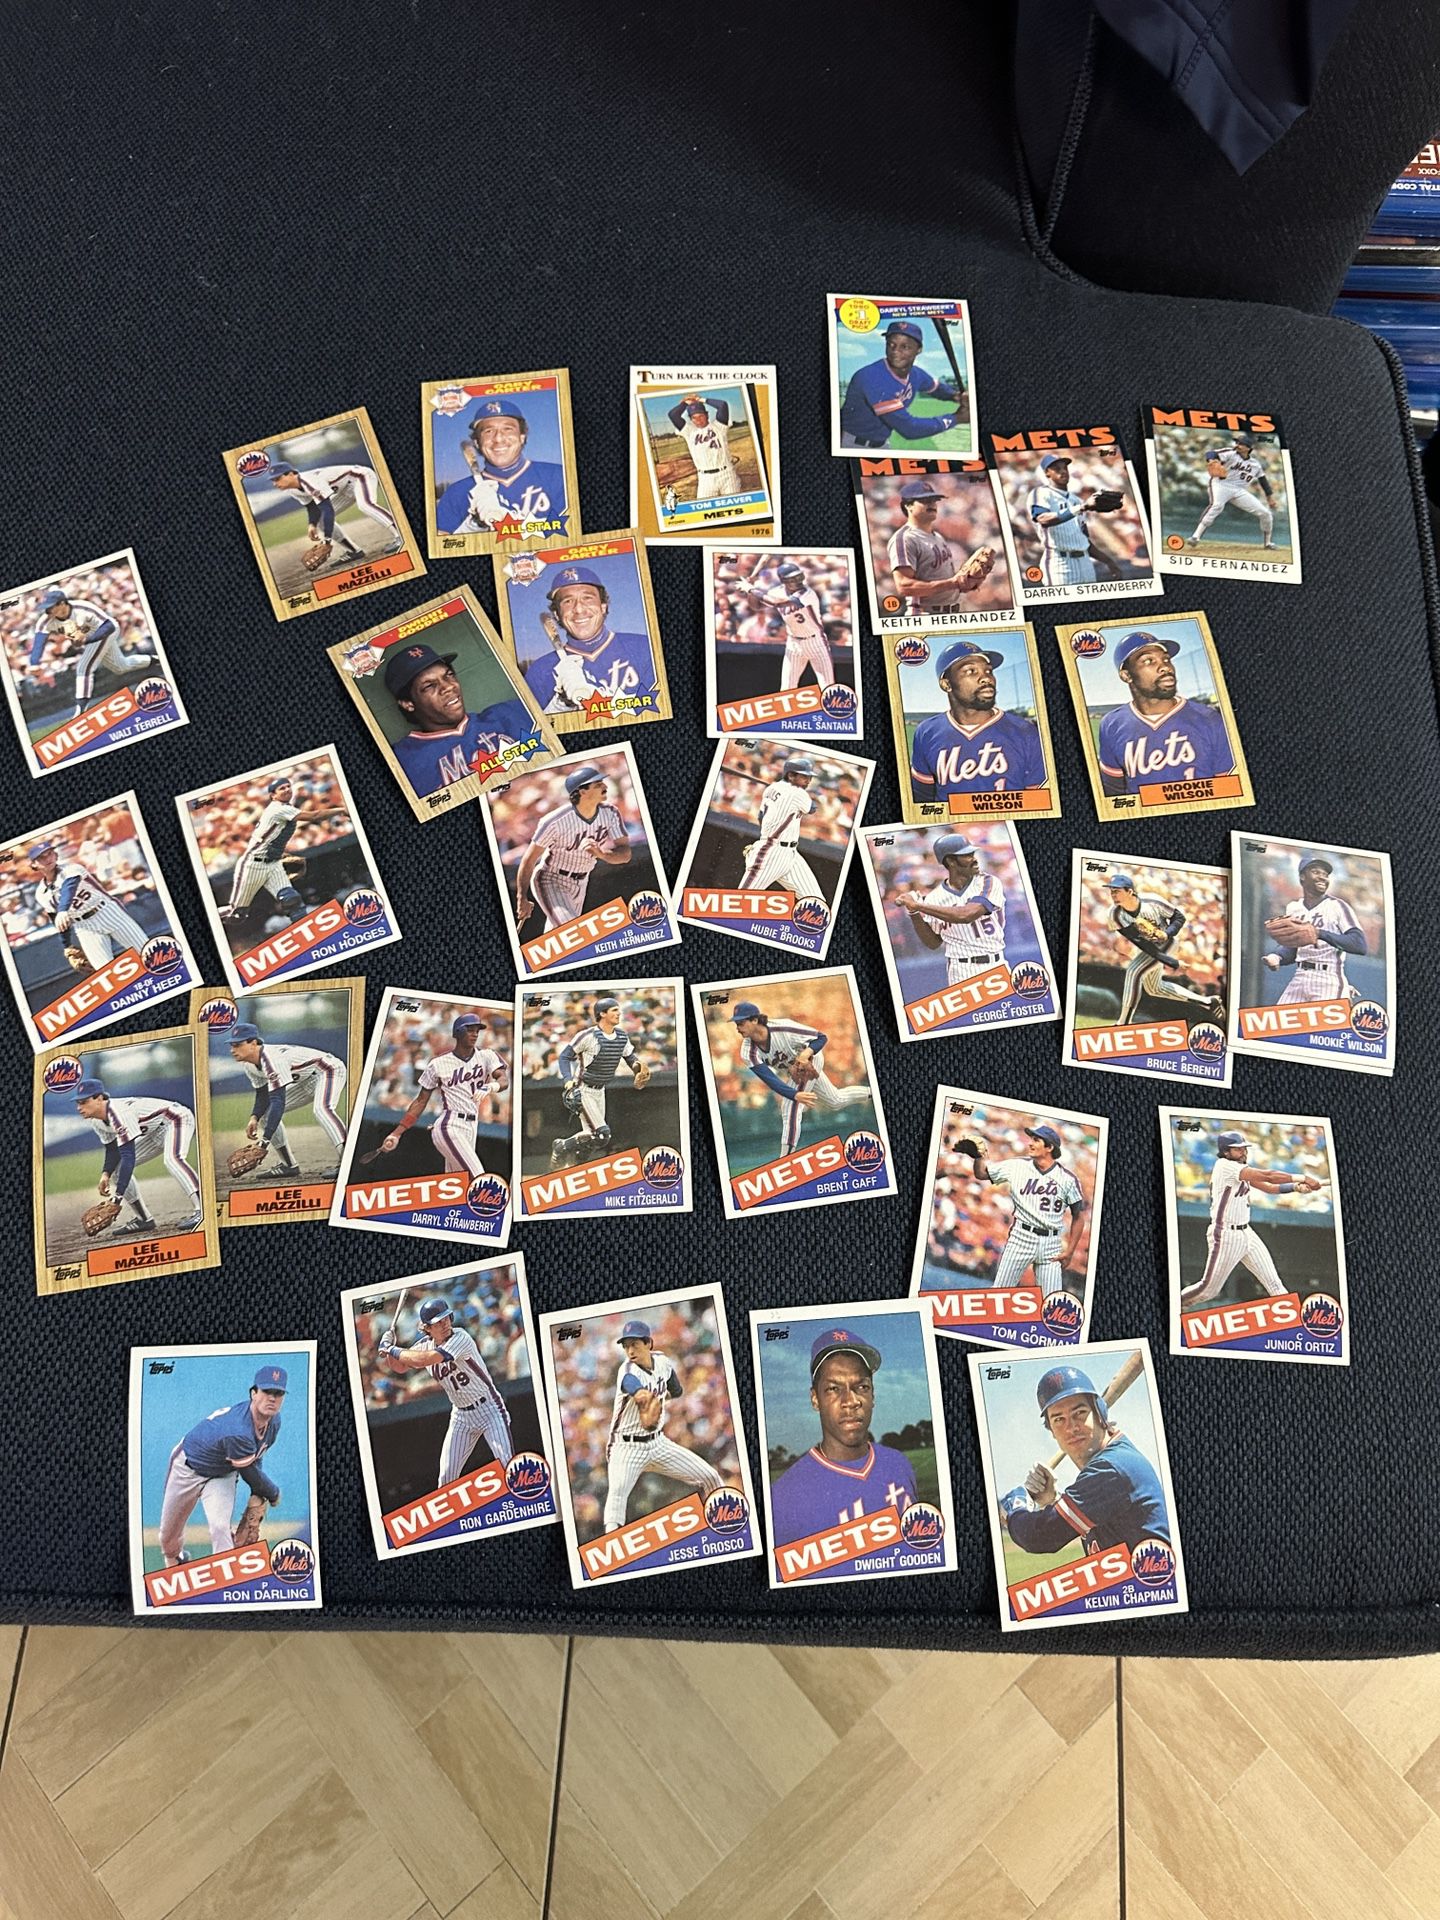 Baseball Cards. New You’re Mets. 